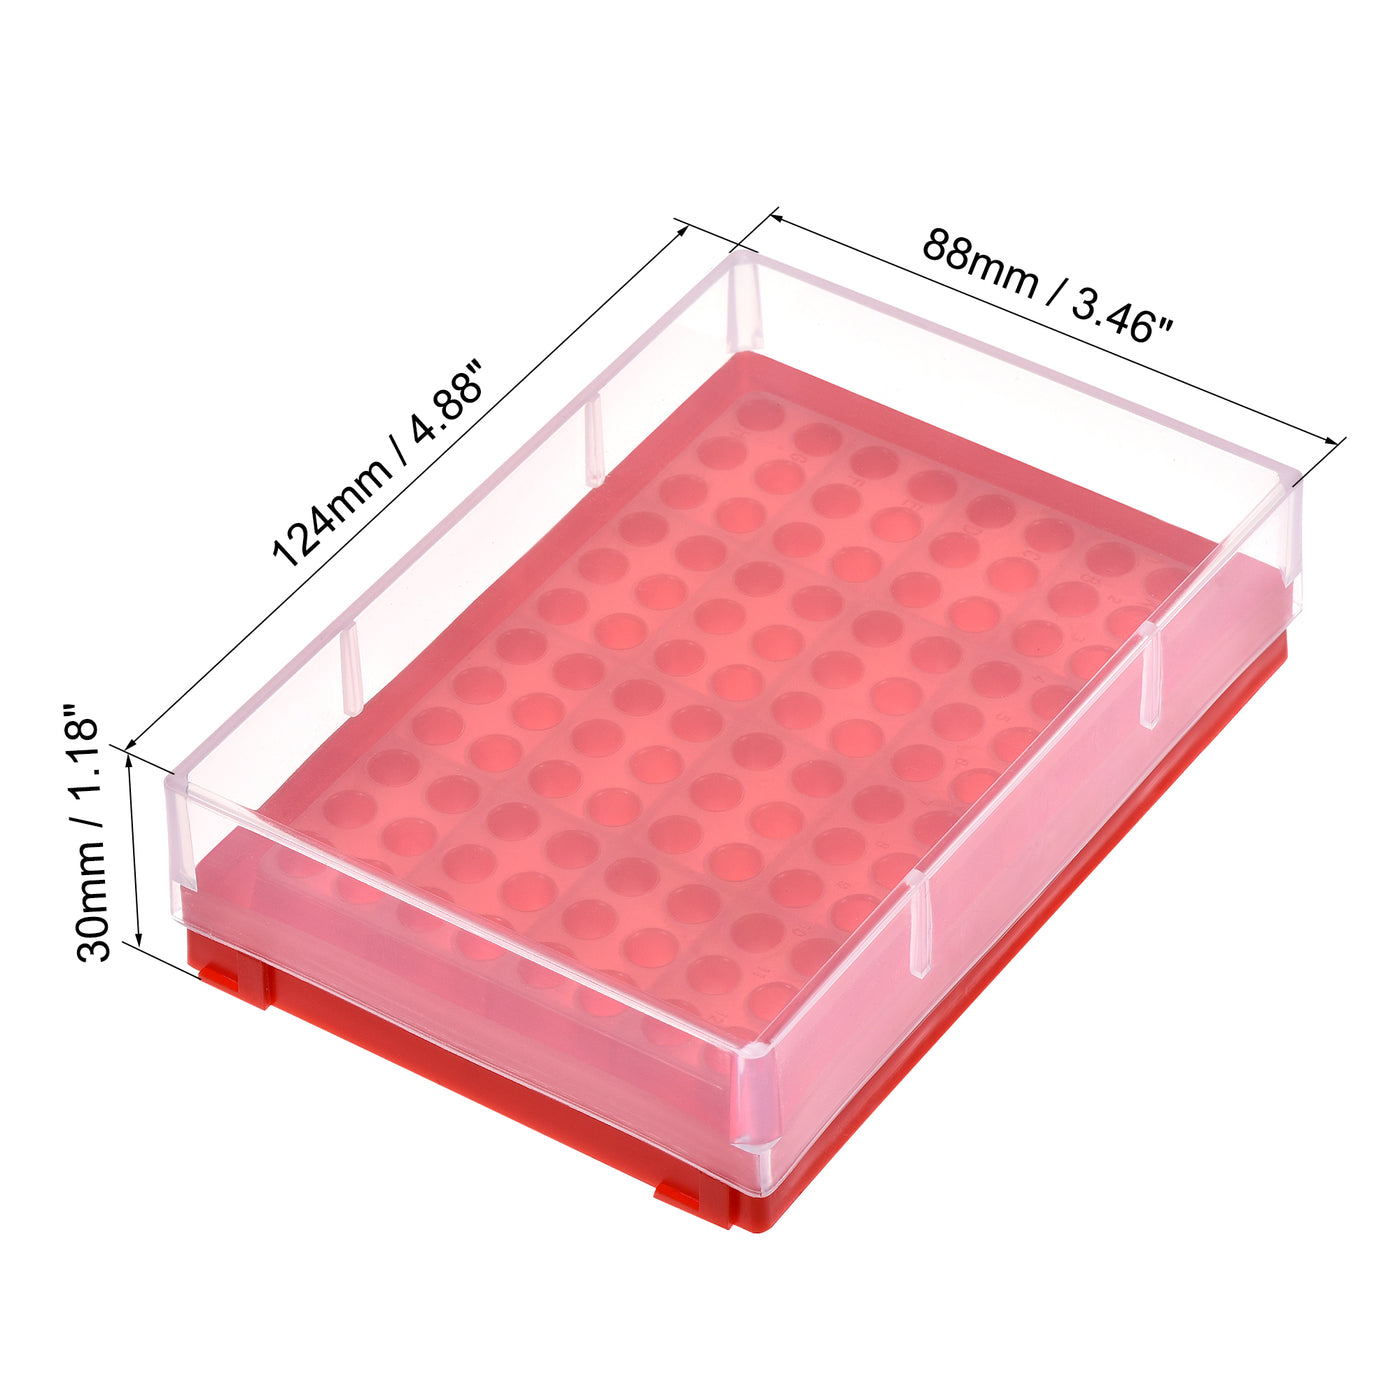 uxcell Uxcell Centrifuge Tube Rack Box, 96-Well for 0.2ml Tubes Blue Red Green 3in1 Set